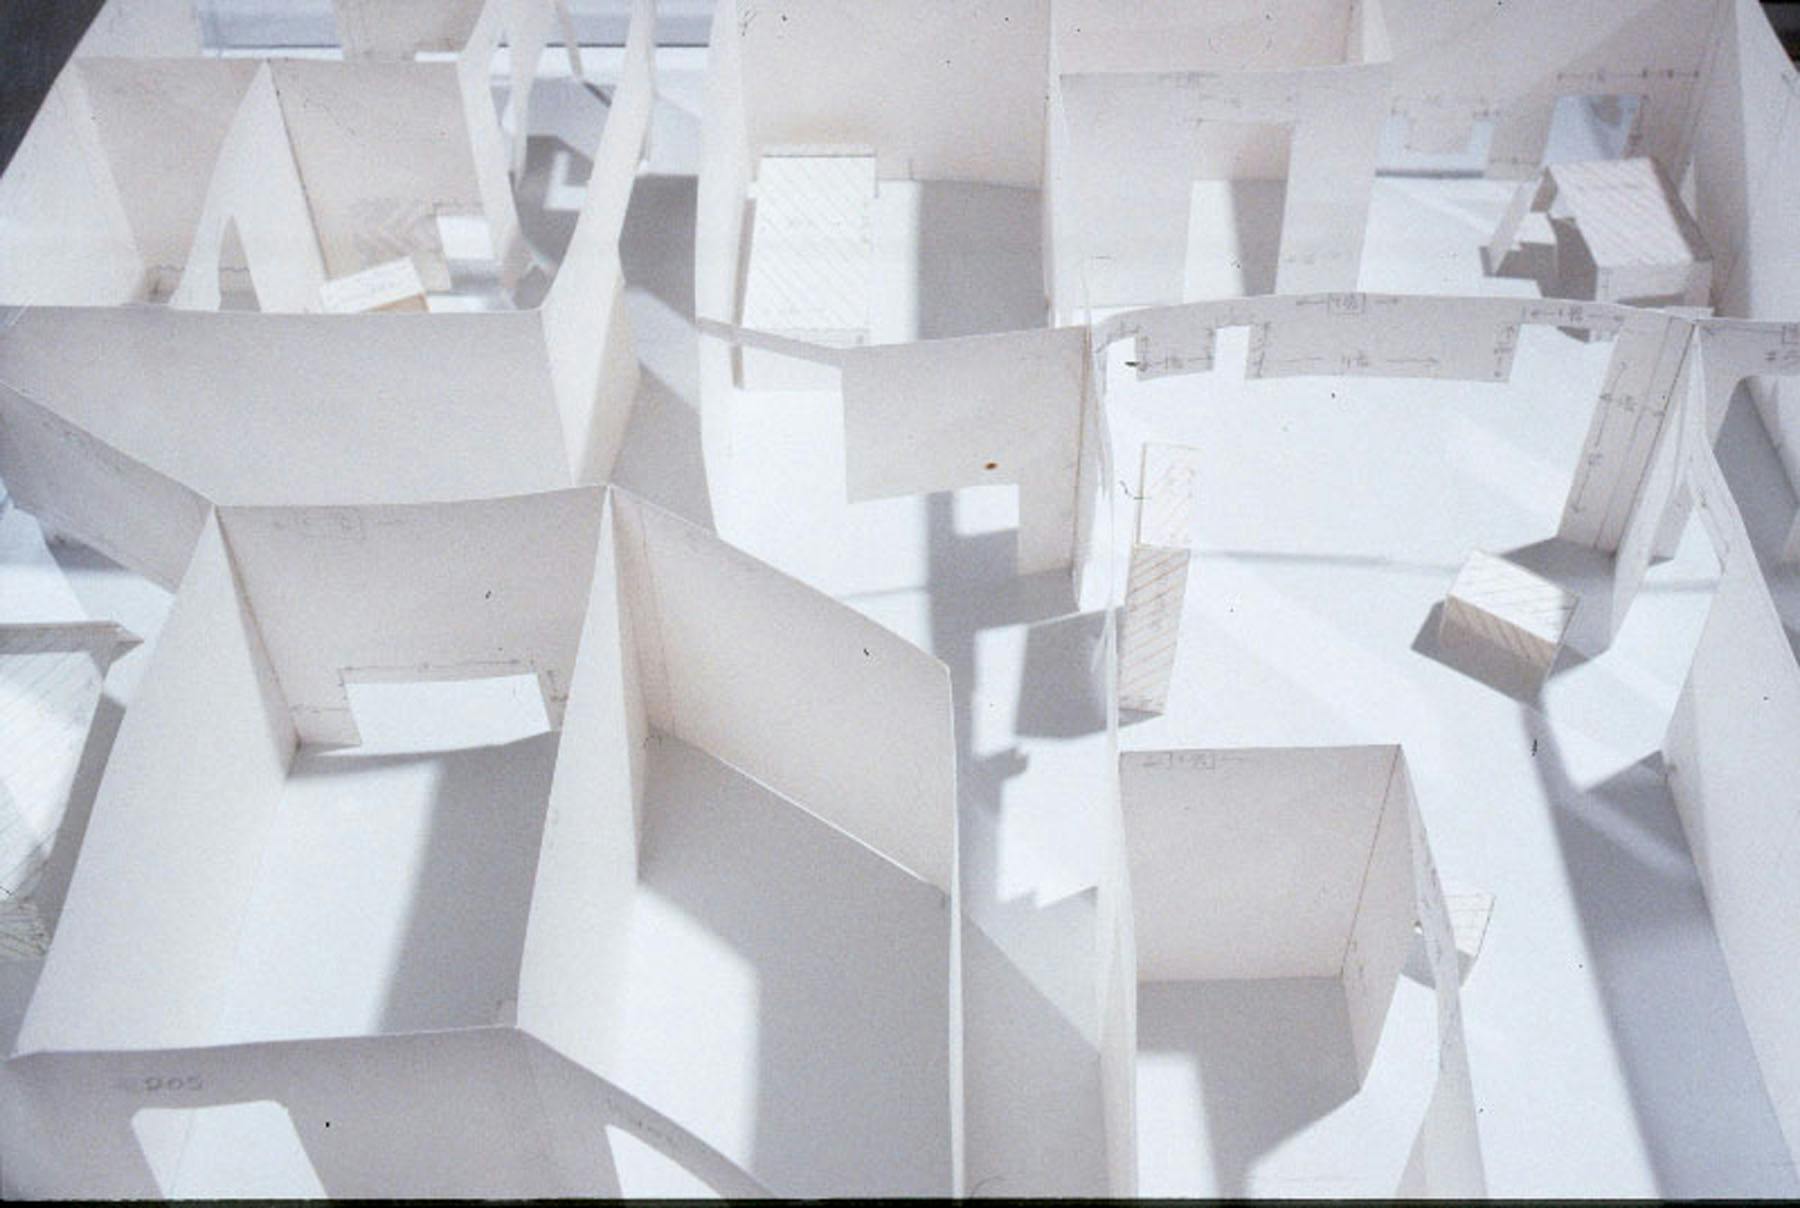 A close view of a paper sculpture. The sculpture is a maquette of a fictitious apartment with many rooms. Annotations and measurements are visible on some of the walls.